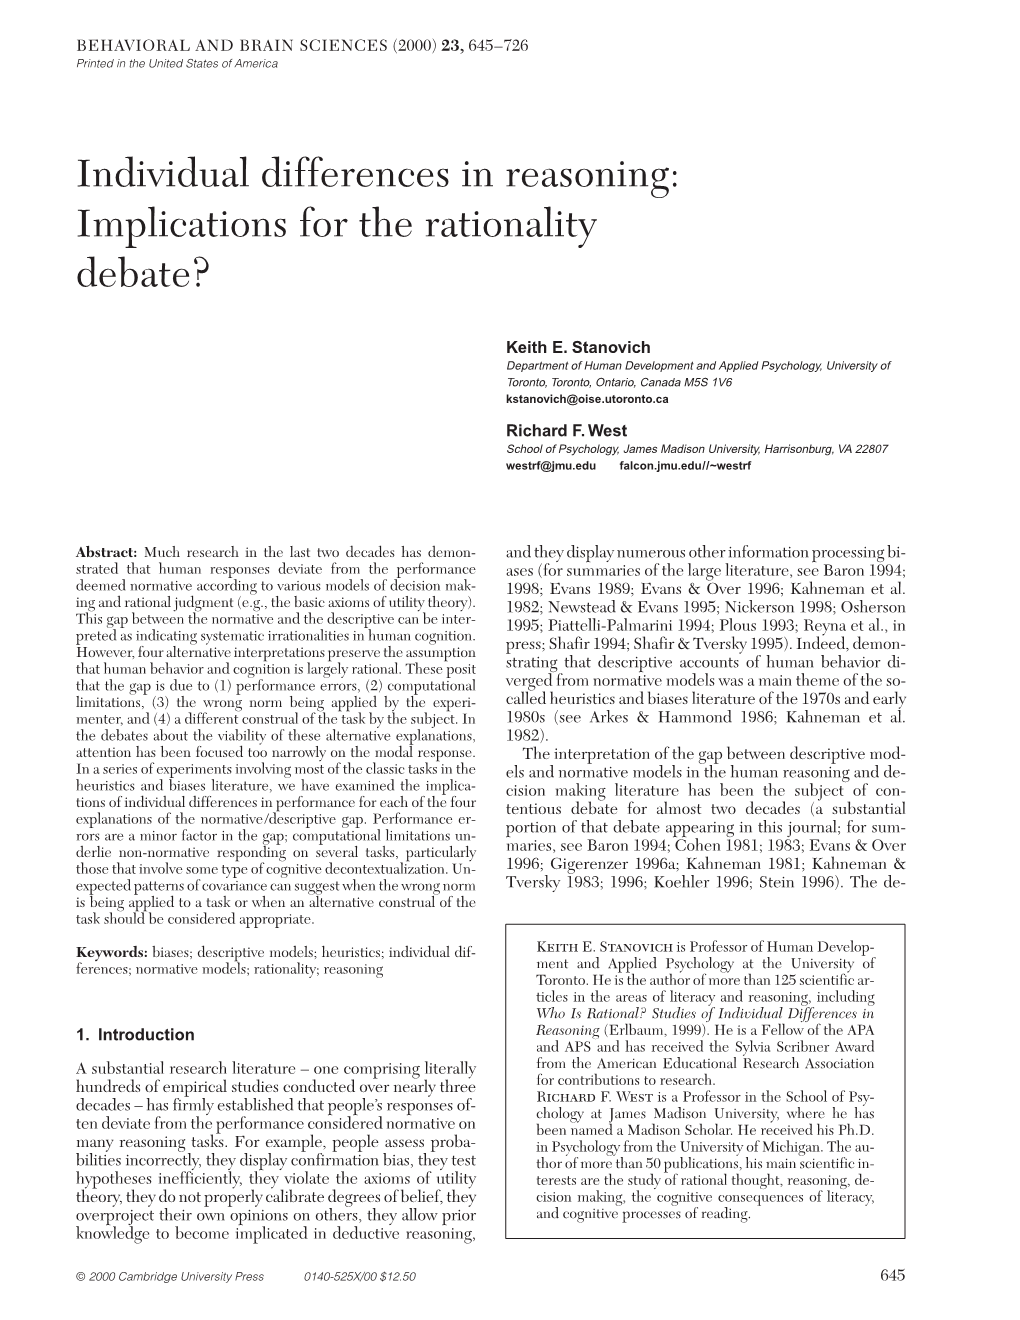 Individual Differences in Reasoning: Implications for the Rationality Debate?